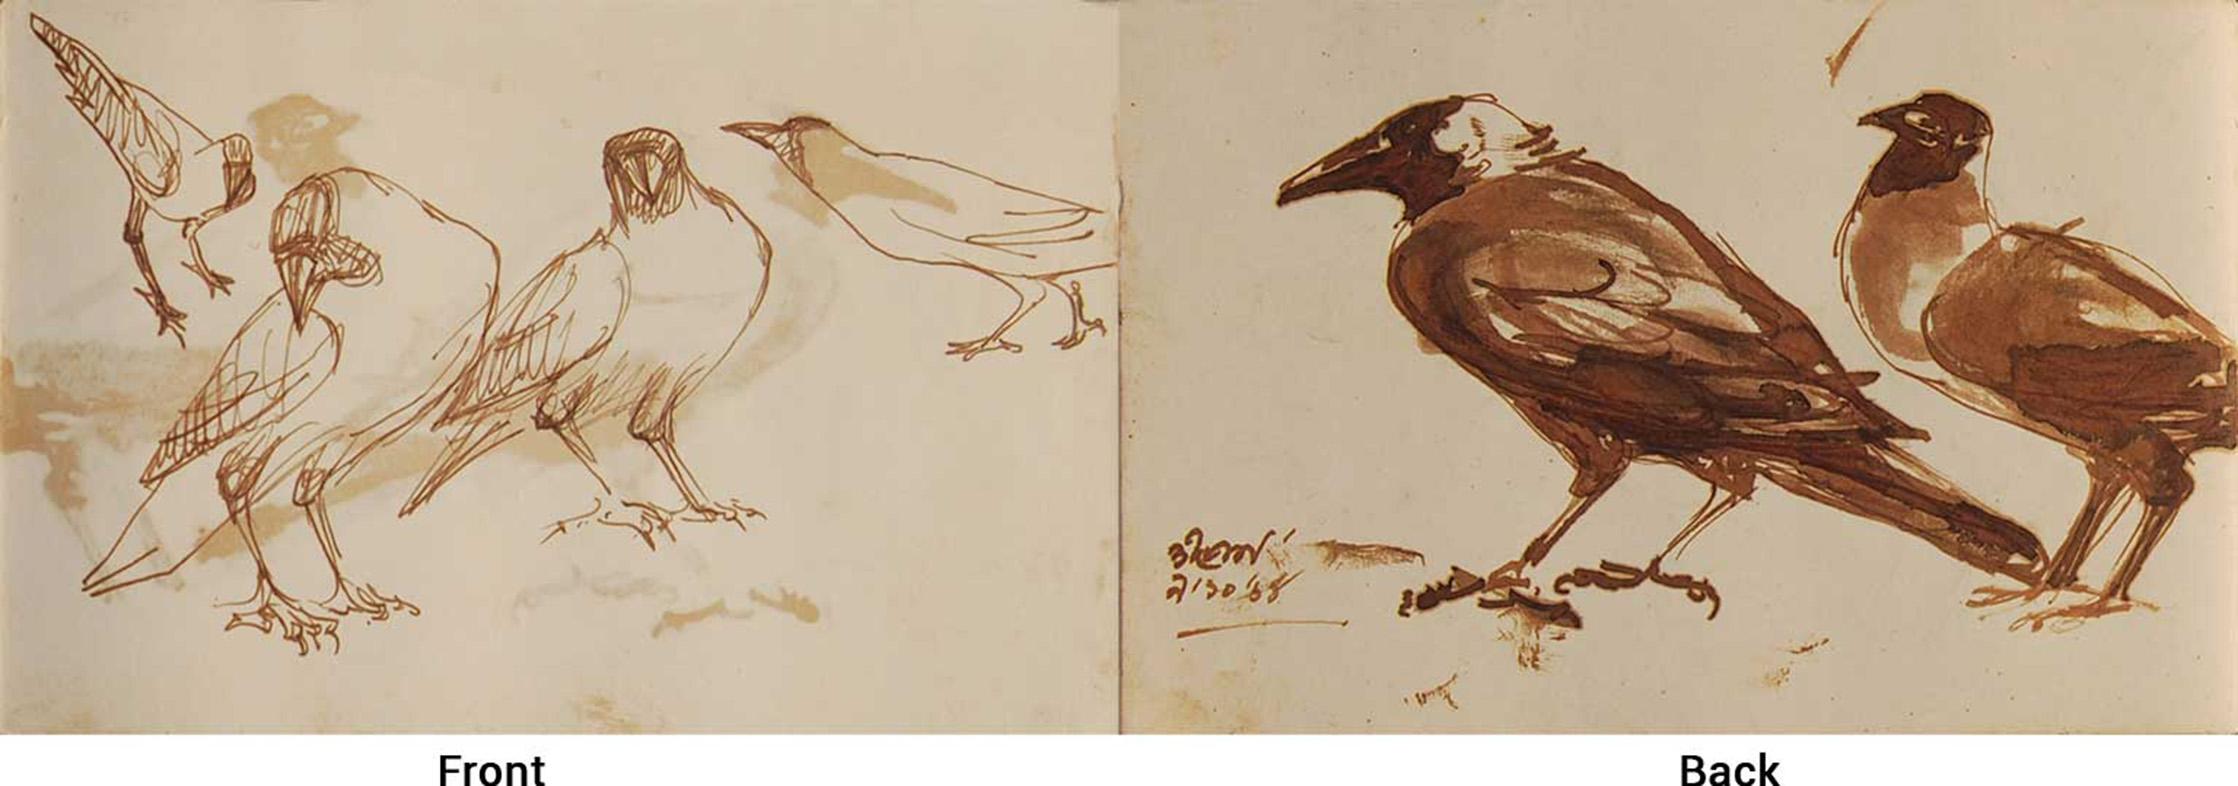 Dipen Bose Animal Art - Crows Series, Watercolour on paper, Rare Art by Indian Bengal Artist "In Stock"